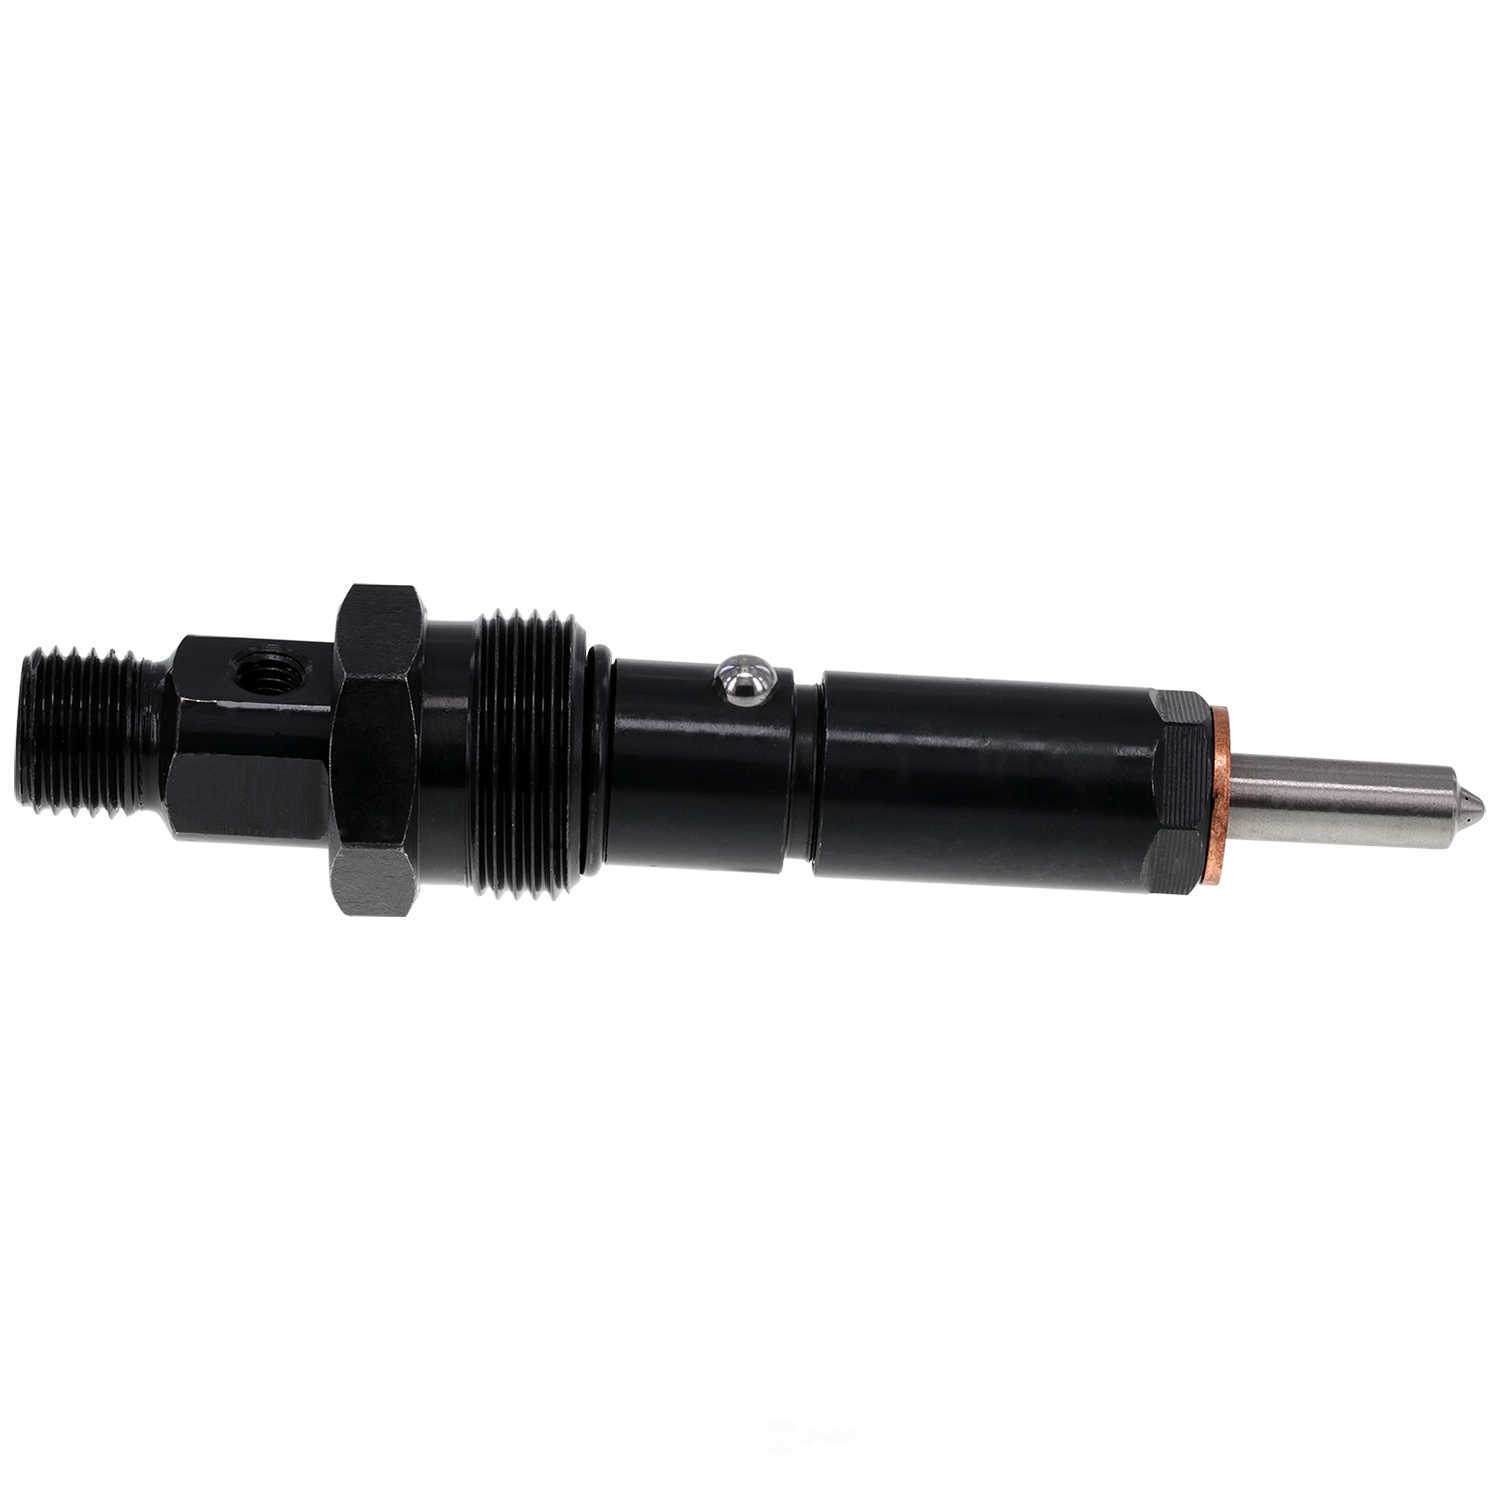 GB REMANUFACTURING INC. - New Diesel Fuel Injector - GBR 611-105